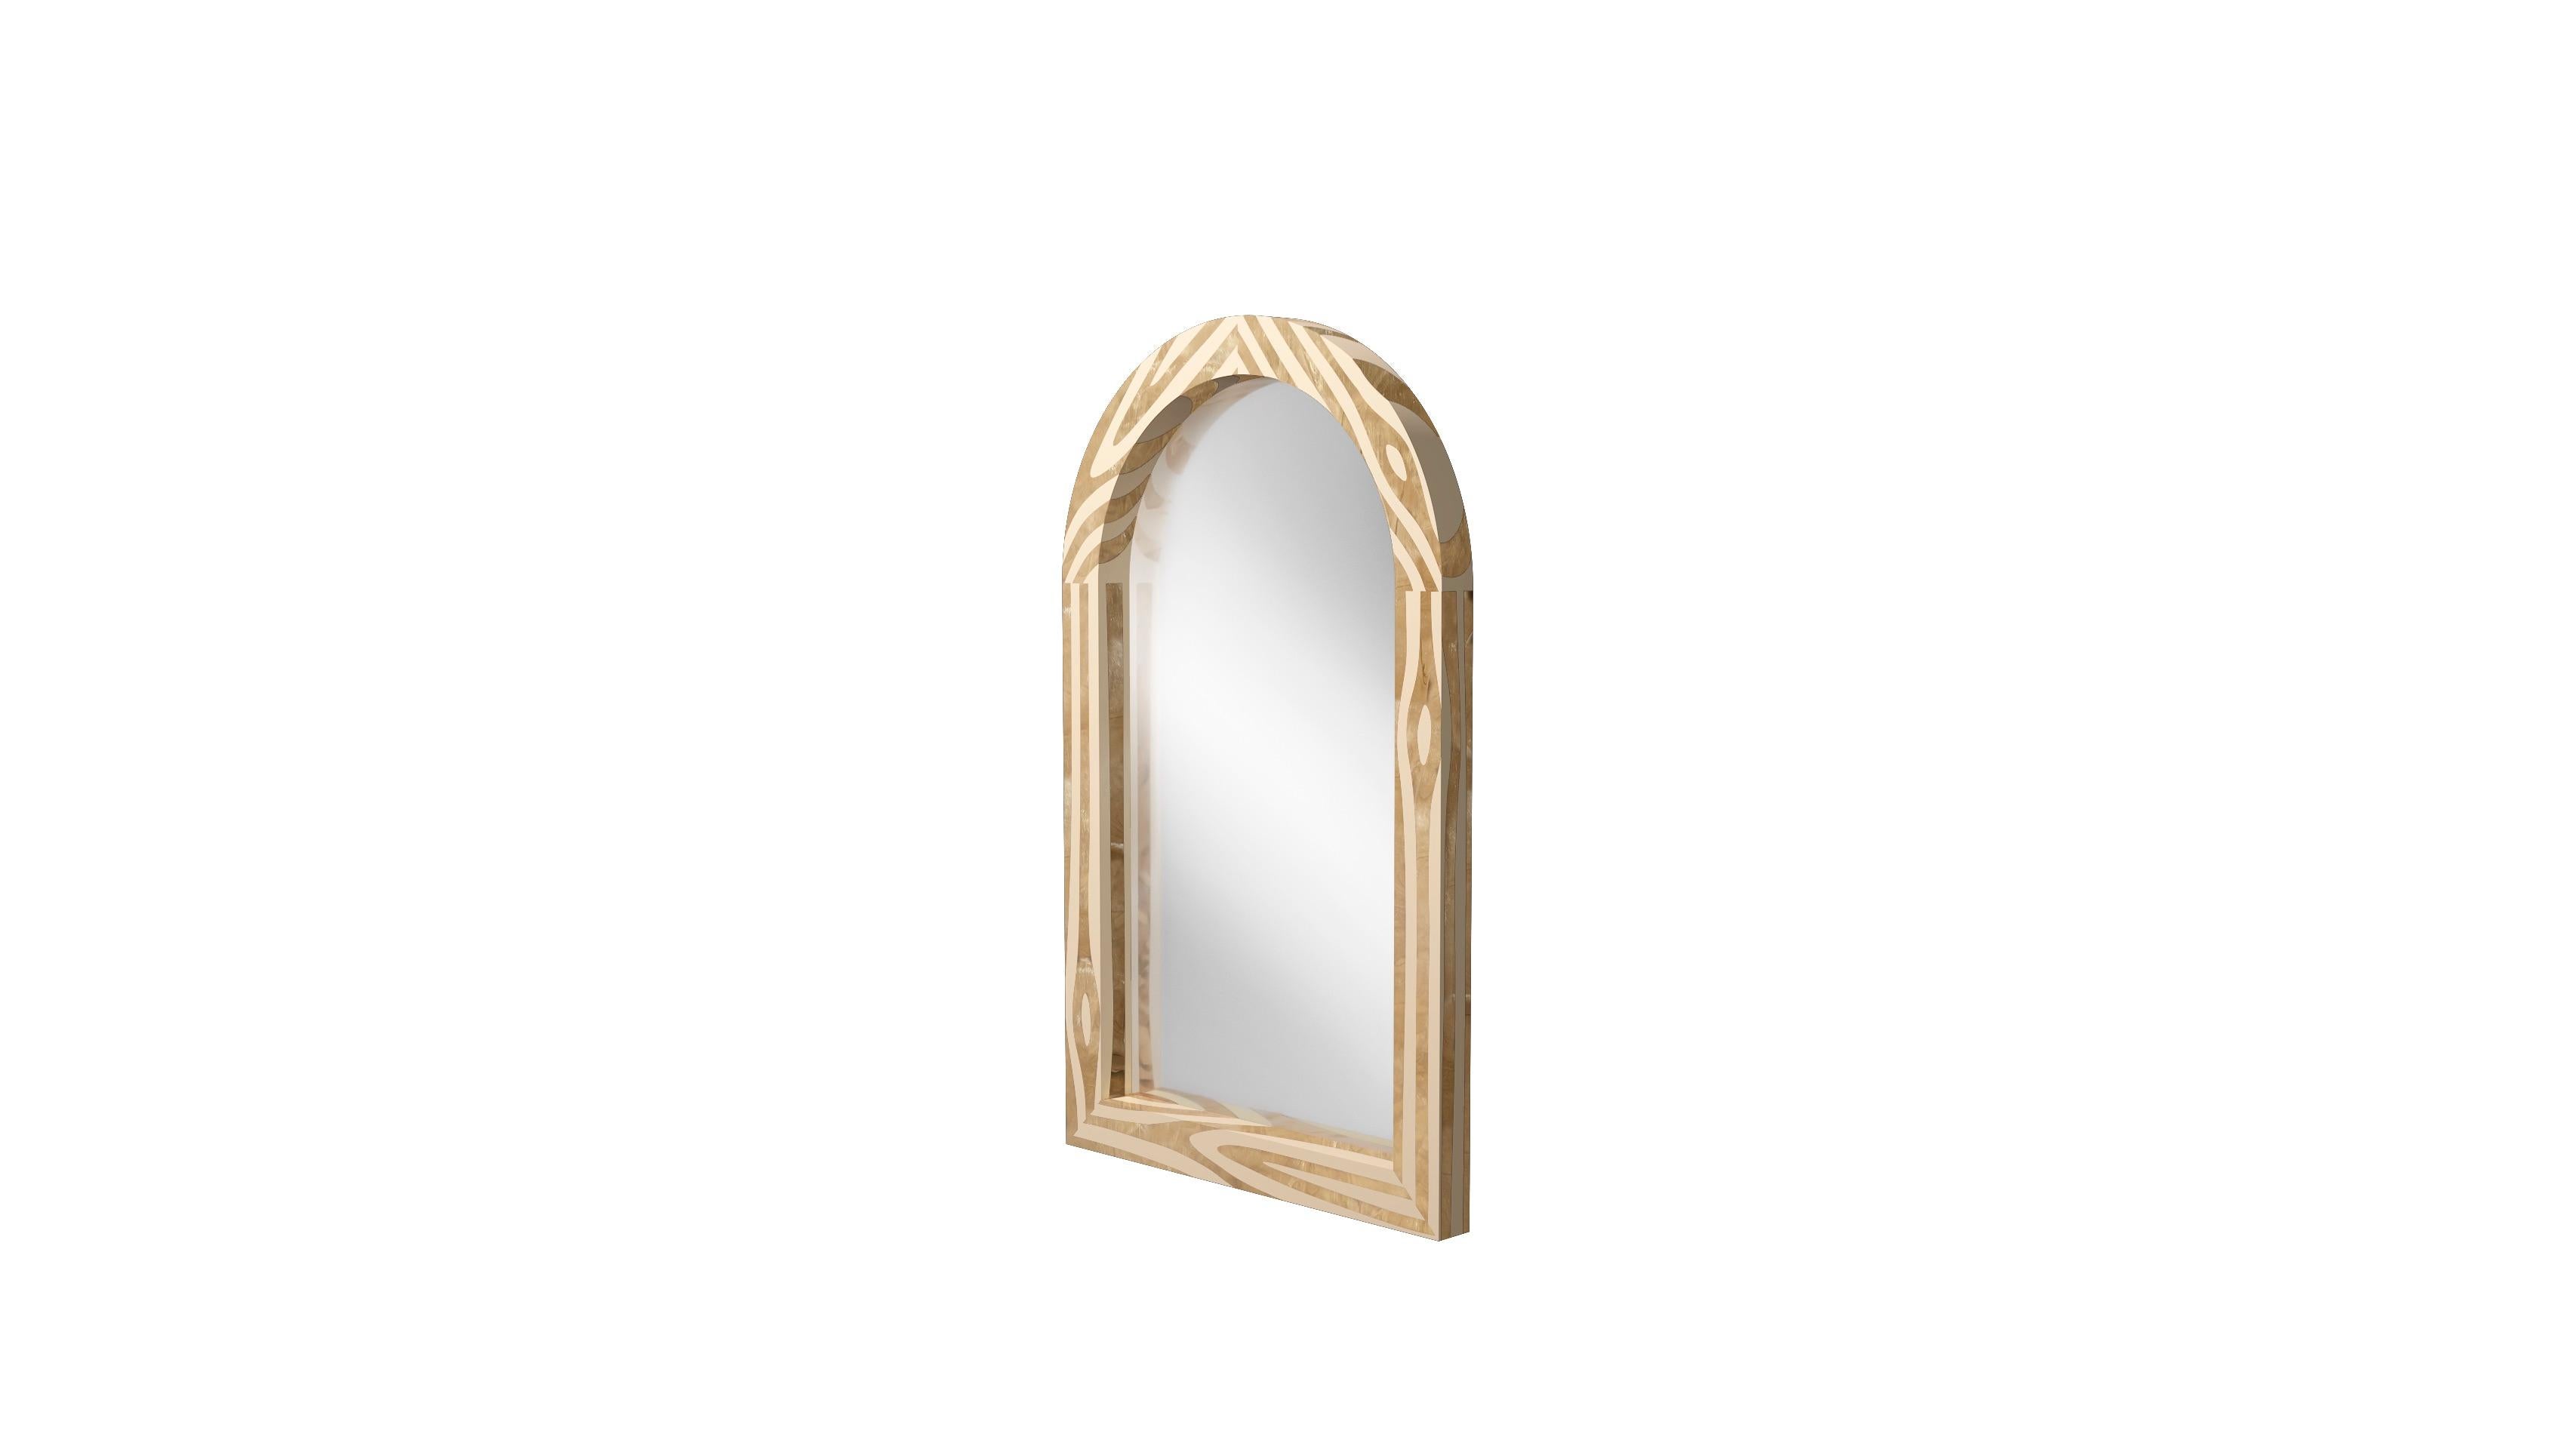 Forest wall mirror with brass inlay by Marcantonio, is an arched mirror, and its frame has brass inlay resembling the beauty of natural wood. 

For his debut creations, Marcantonio introduced “Vegetal Animal”, a concept that evokes strong emotions